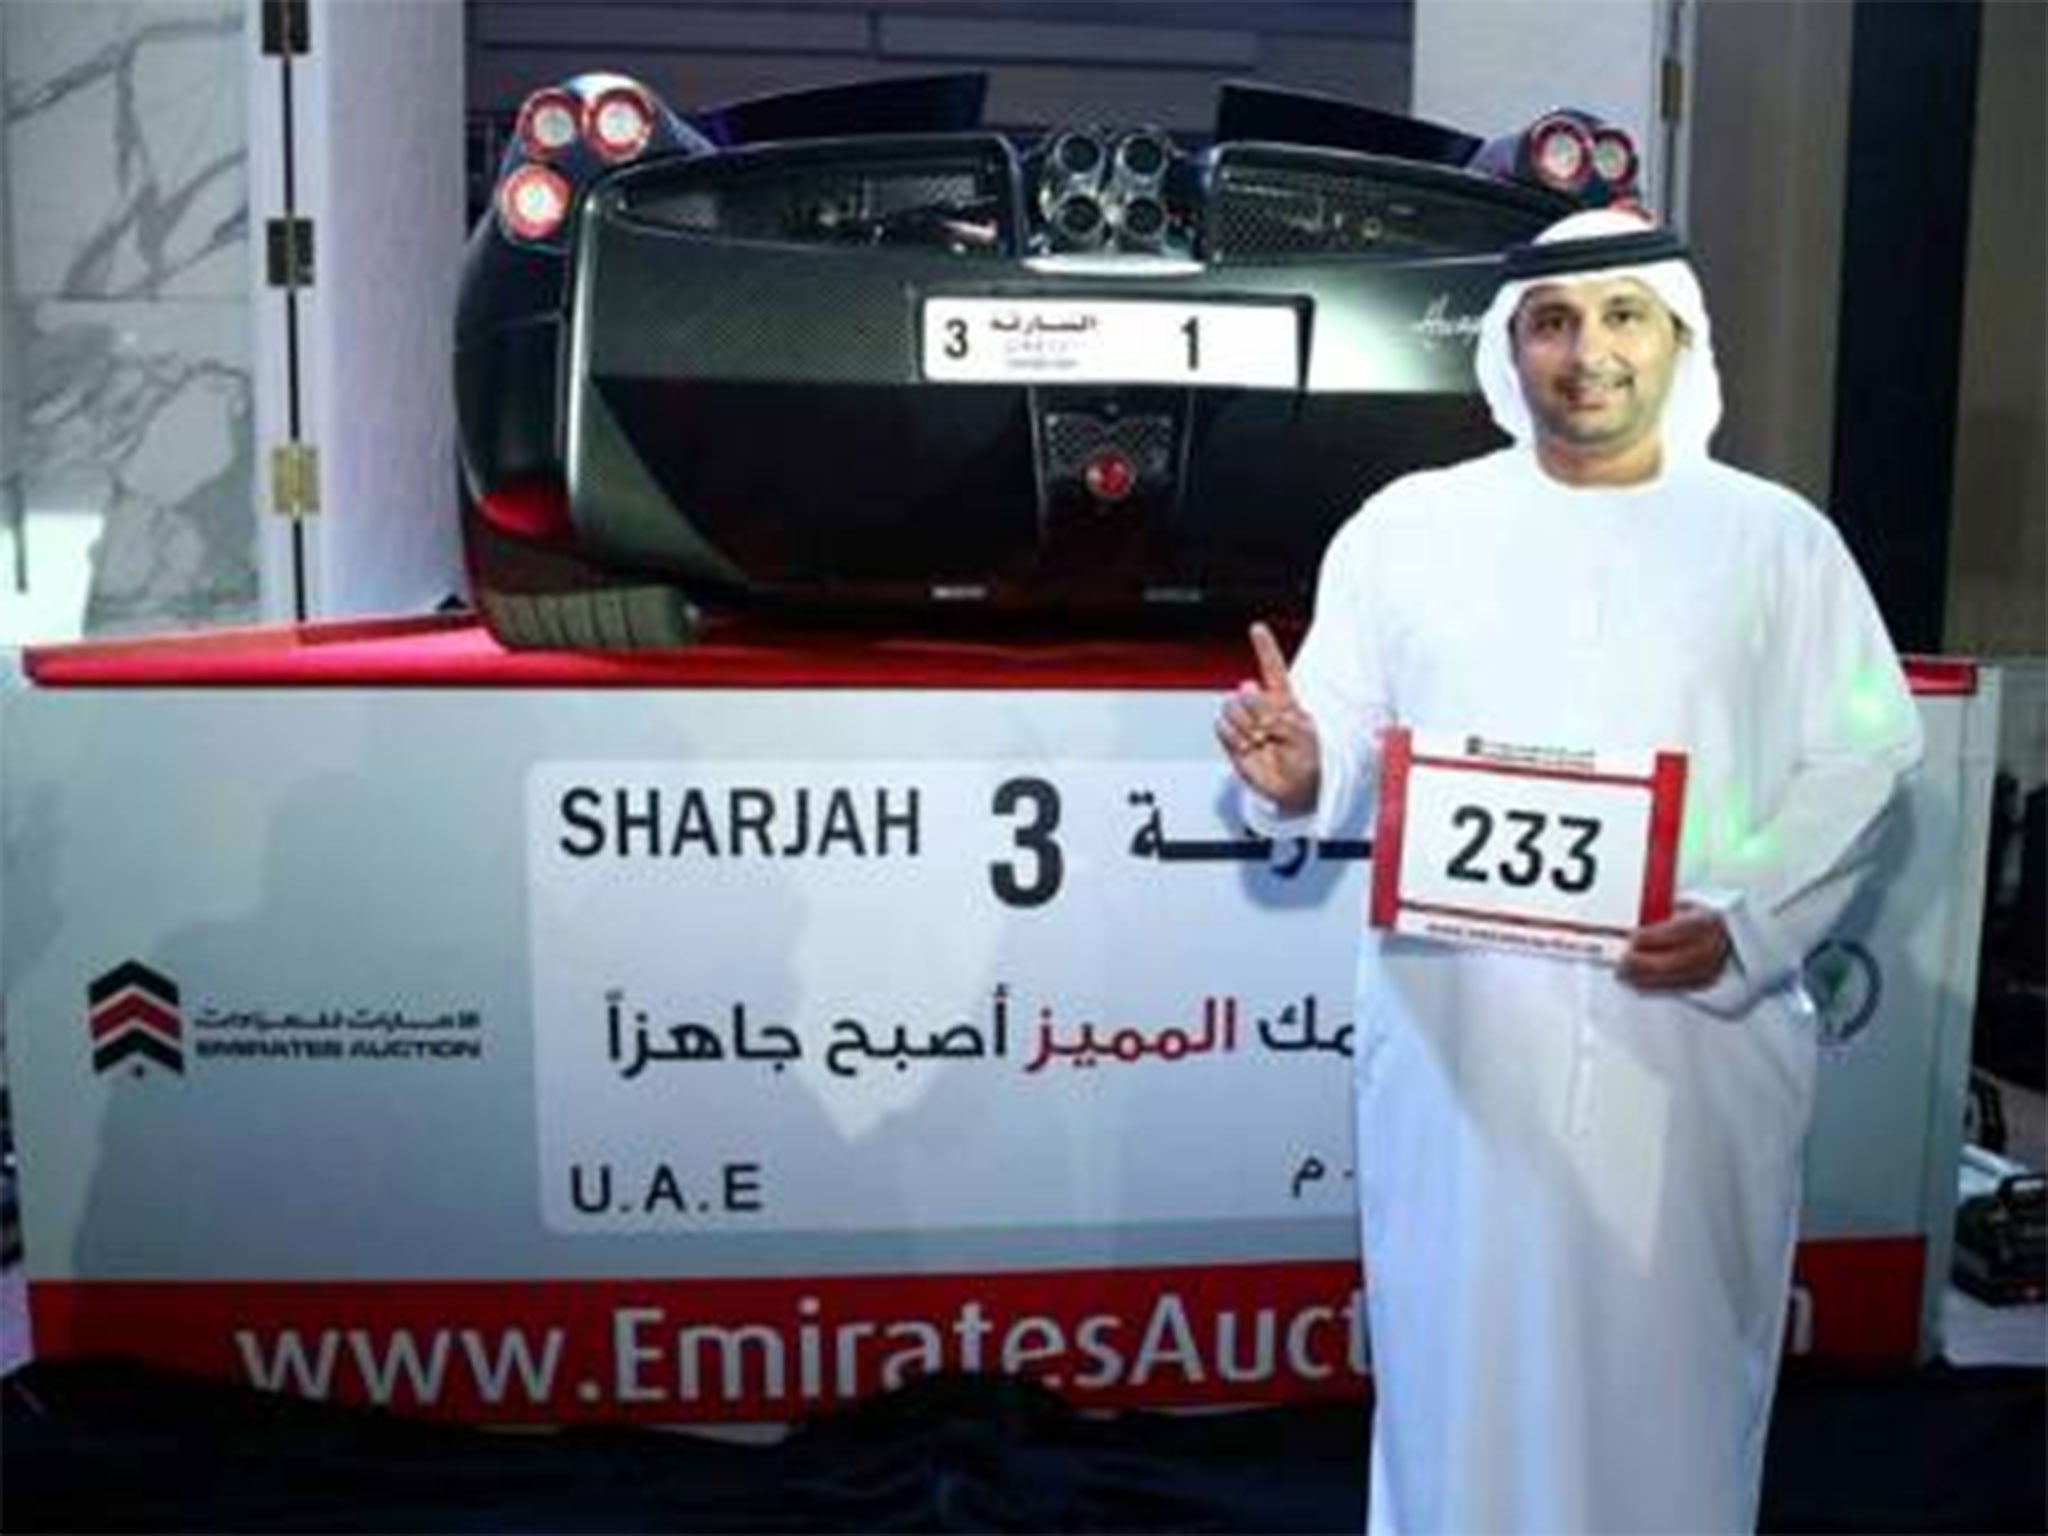 Number 1 Licence Plate Sells For 3 4m At Auction In United Arab Images, Photos, Reviews